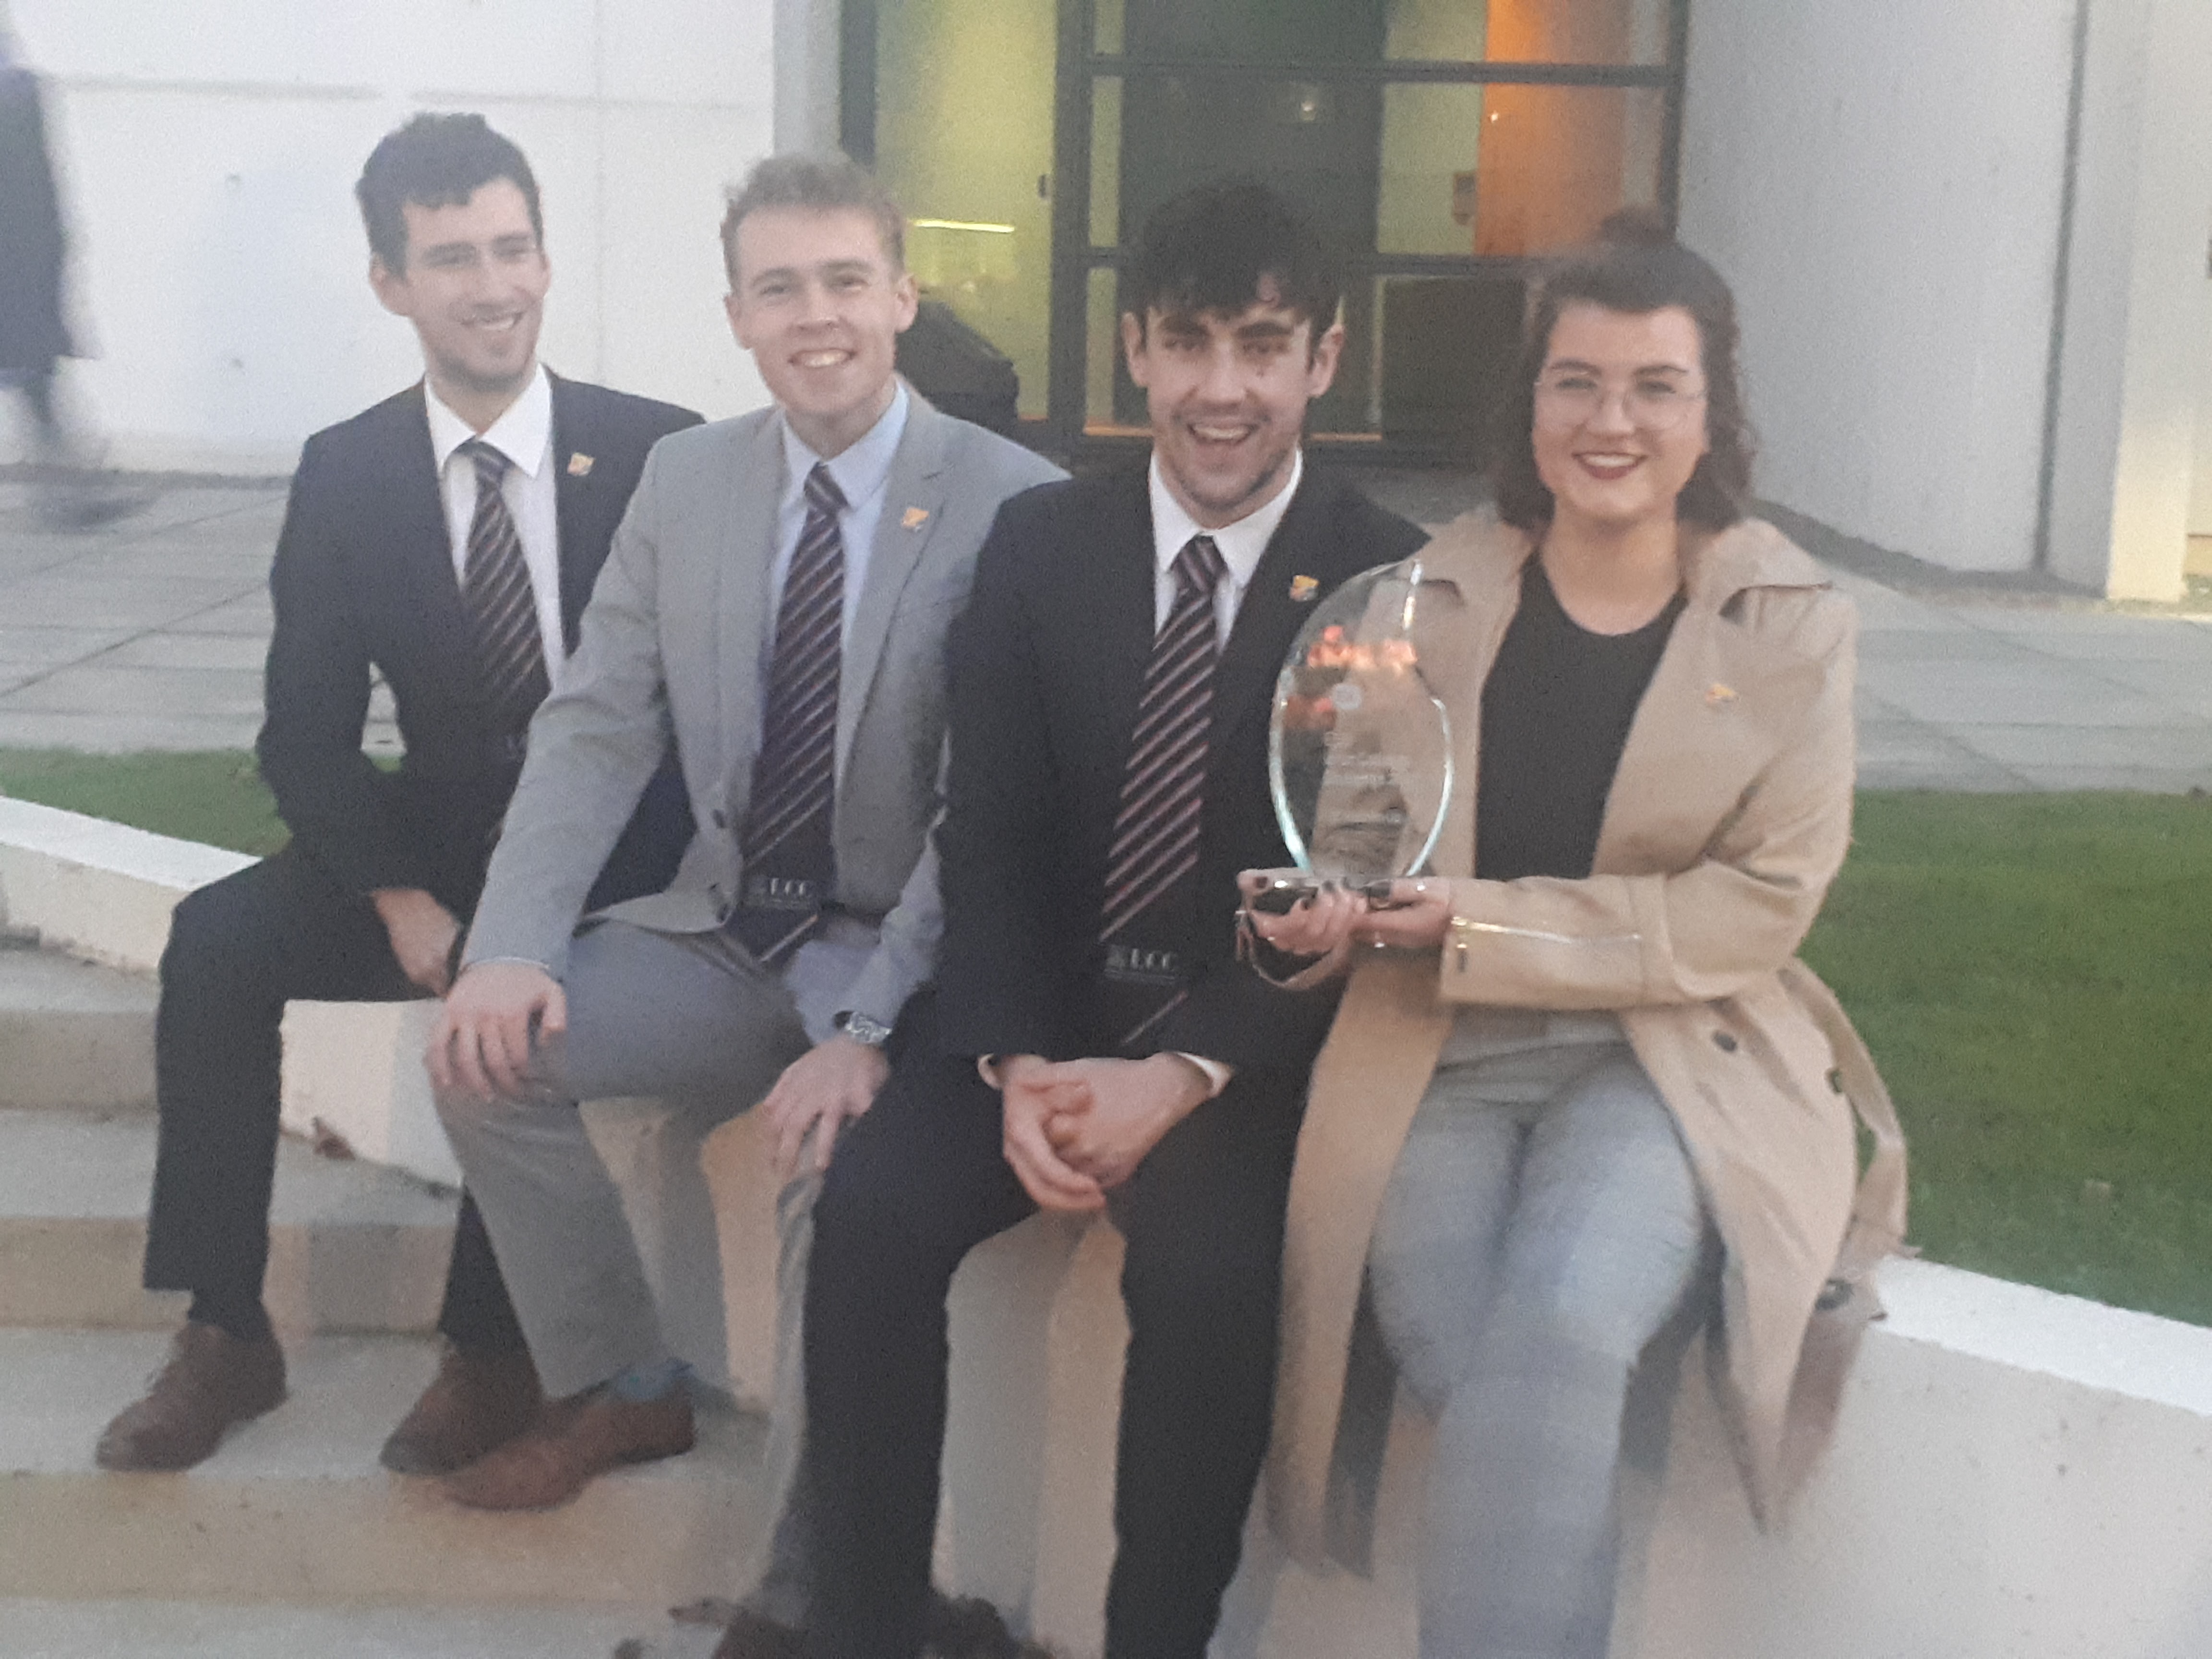 Process II are 1st runners up in the ESB Inter-Colleges Challenge - WOW!